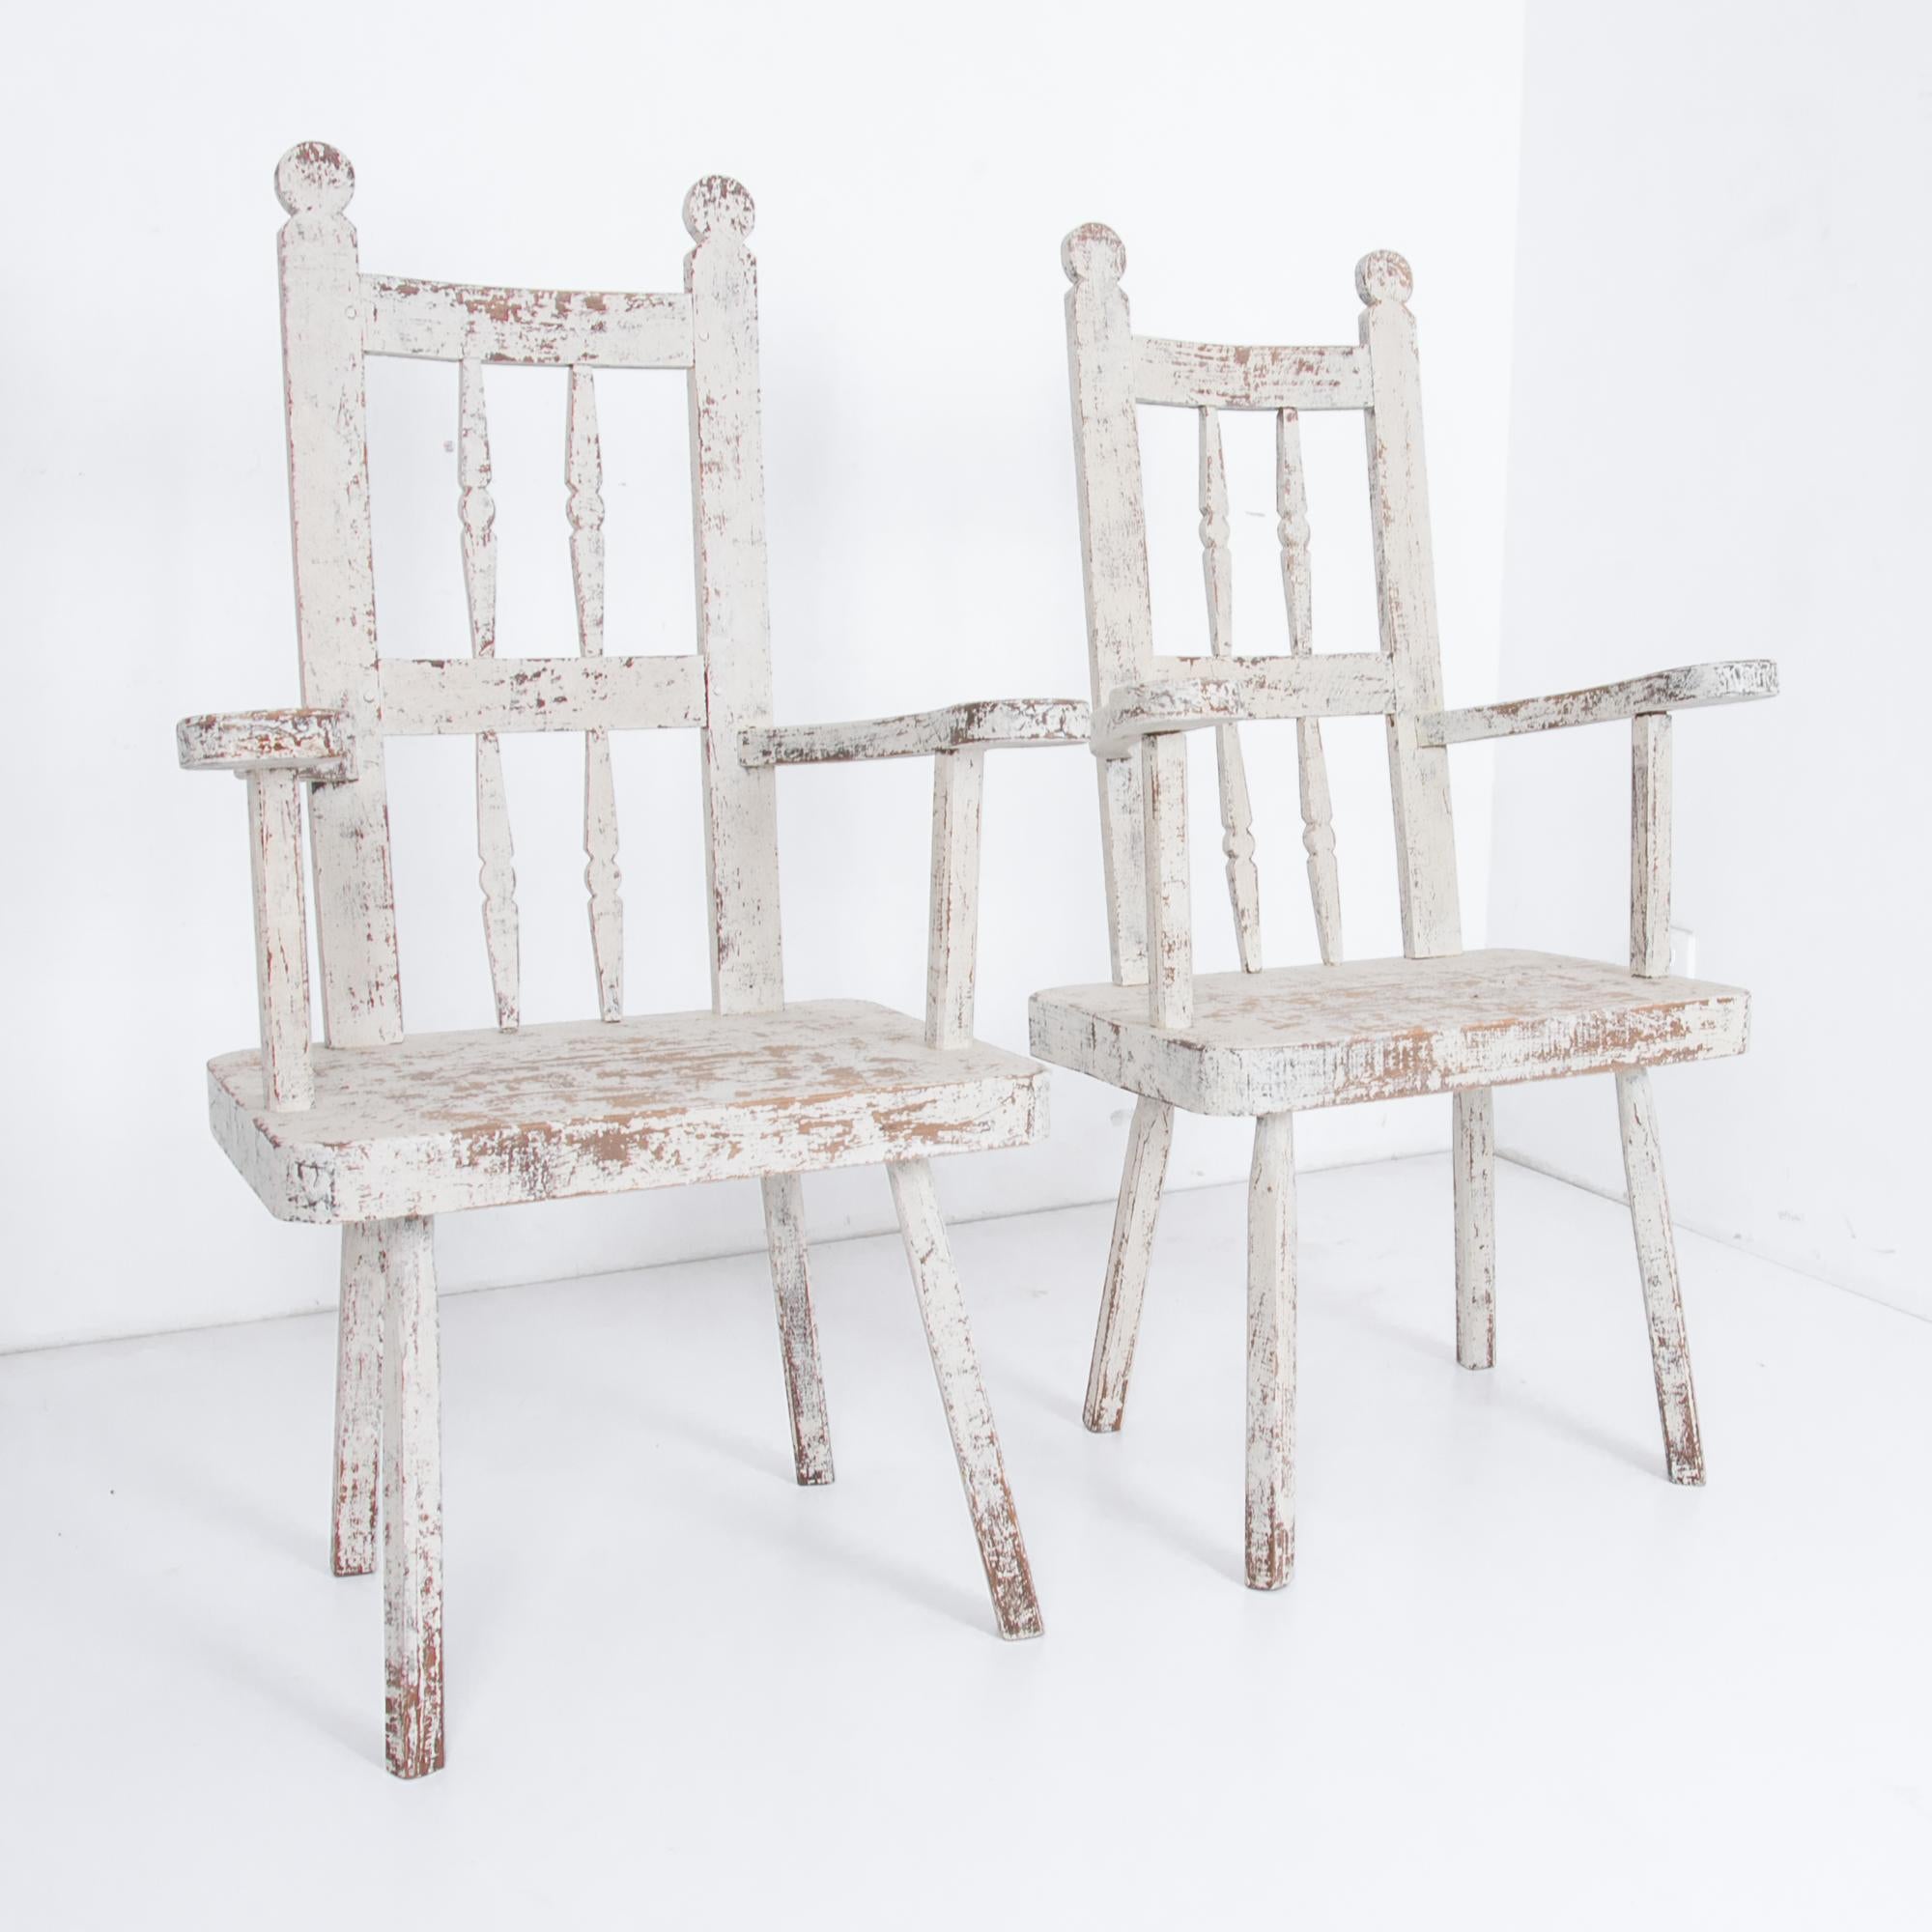 This pair of antique wooden armchairs was made in Northern Europe and exudes authenticity and warmth. The white paint has weathered beautifully into a charming patina, giving the rustic feel of a farmhouse. These armchairs rest on splayed legs, and